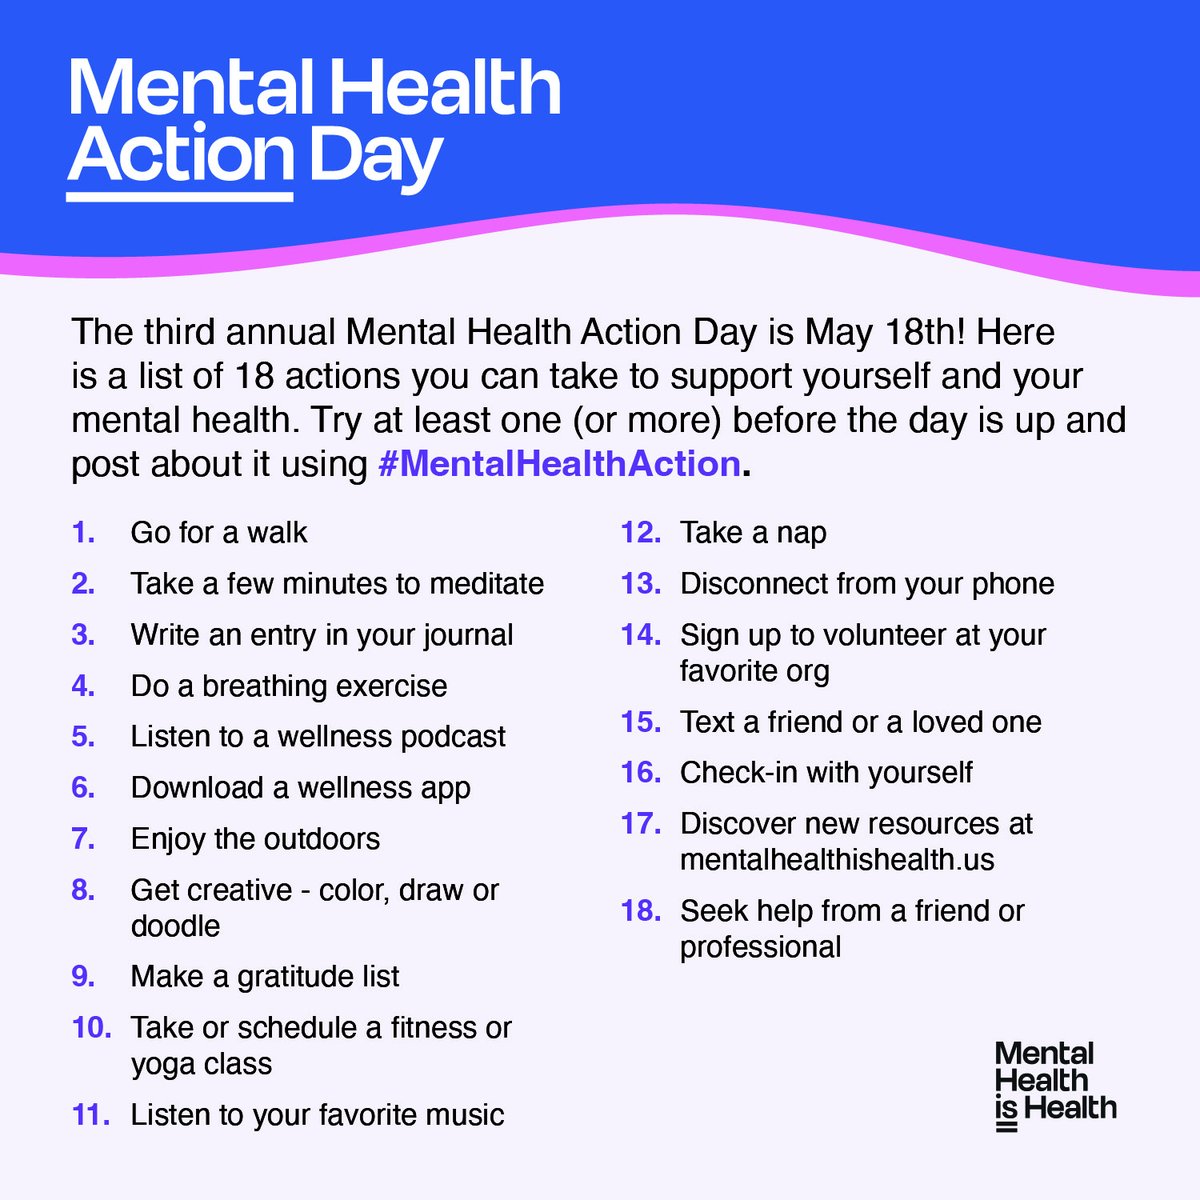 Today is Mental Health Action Day! How are you supporting you mental health today, let us know in the comments? #MentalHealthAction